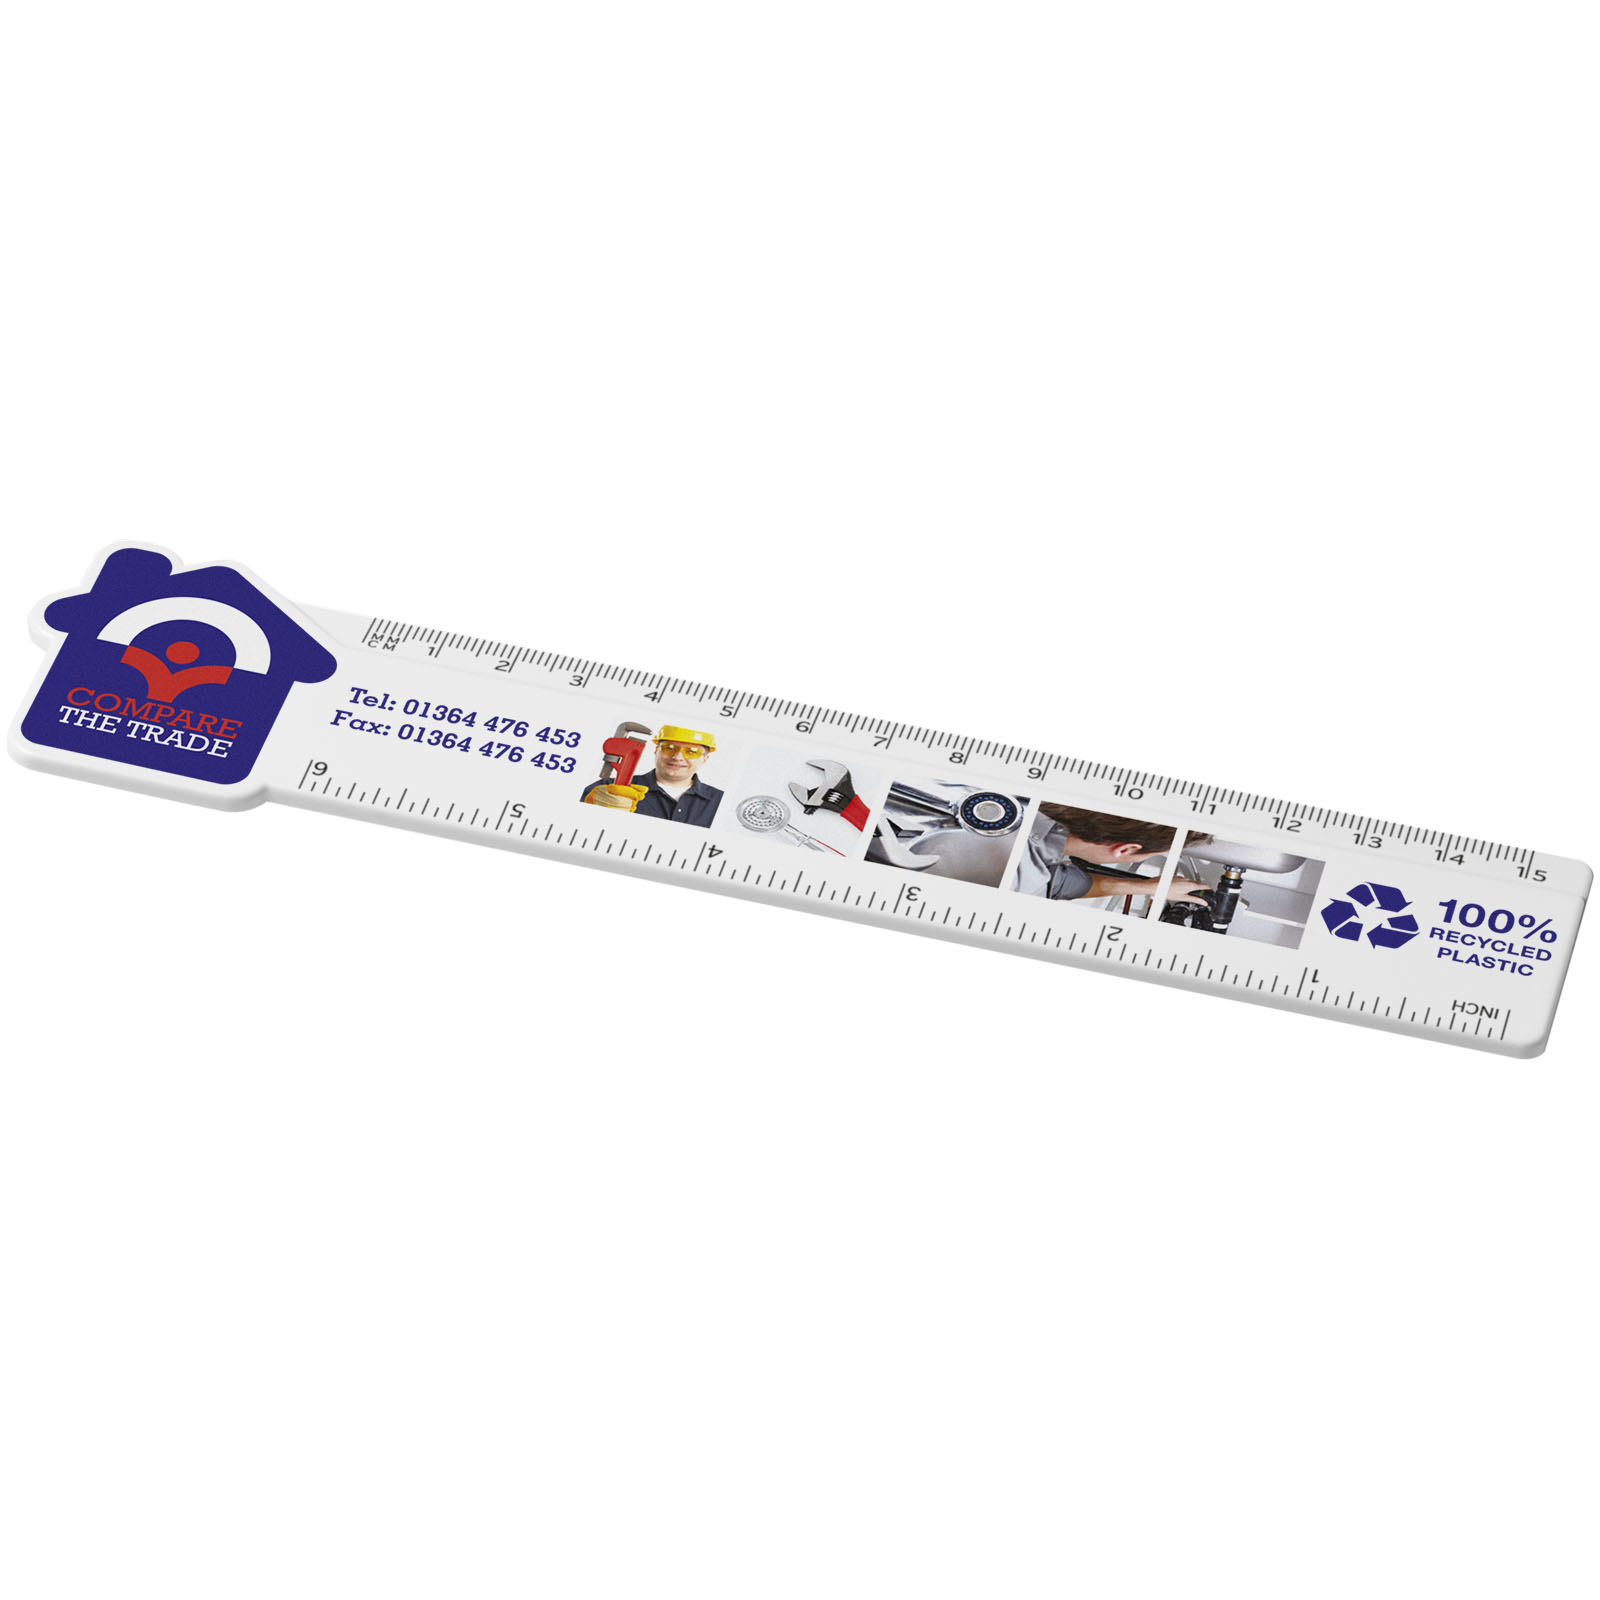 Advertising Desk Accessories - Tait 15 cm house-shaped recycled plastic ruler